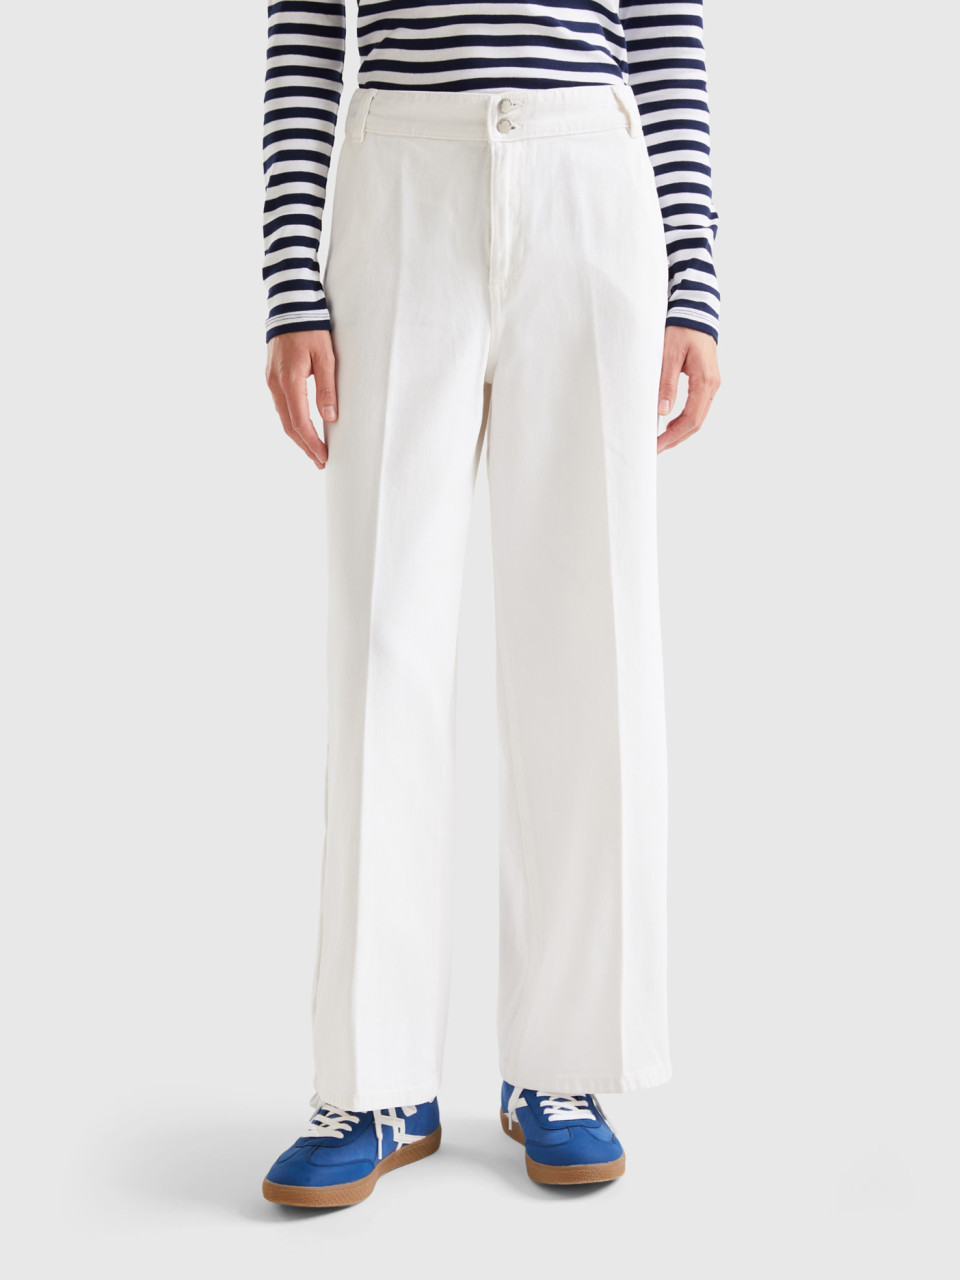 Benetton, High-waisted Trousers With Wide Leg, White, Women